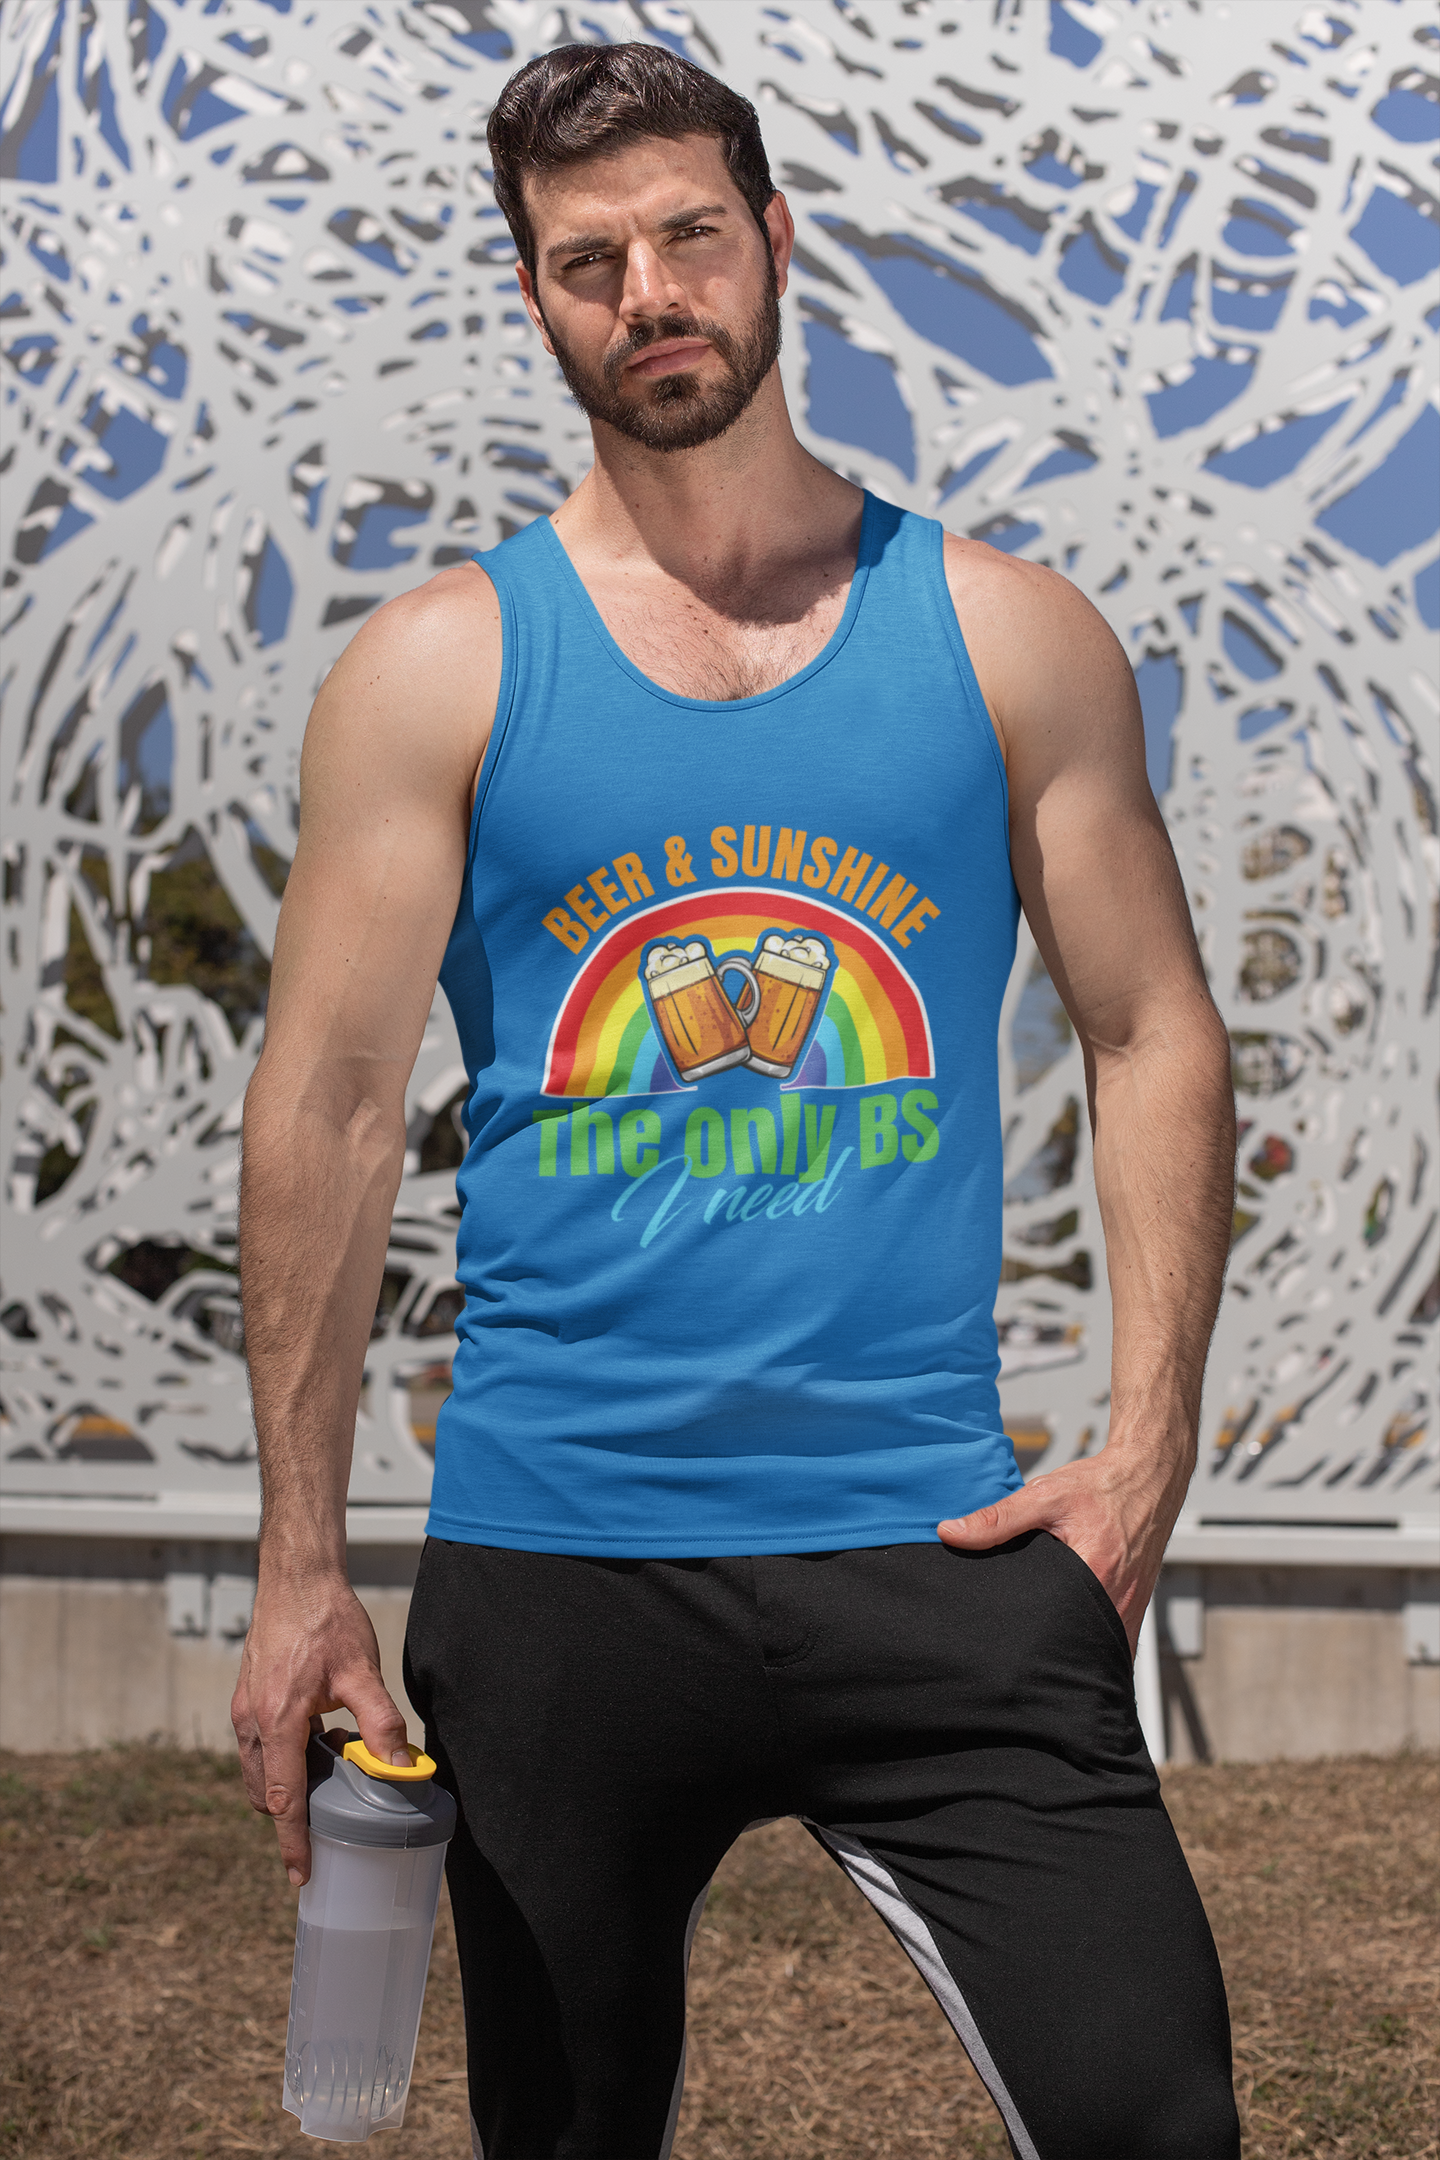 Beer & Sunshine; 100% cotton tank top. Removable tag for comfort